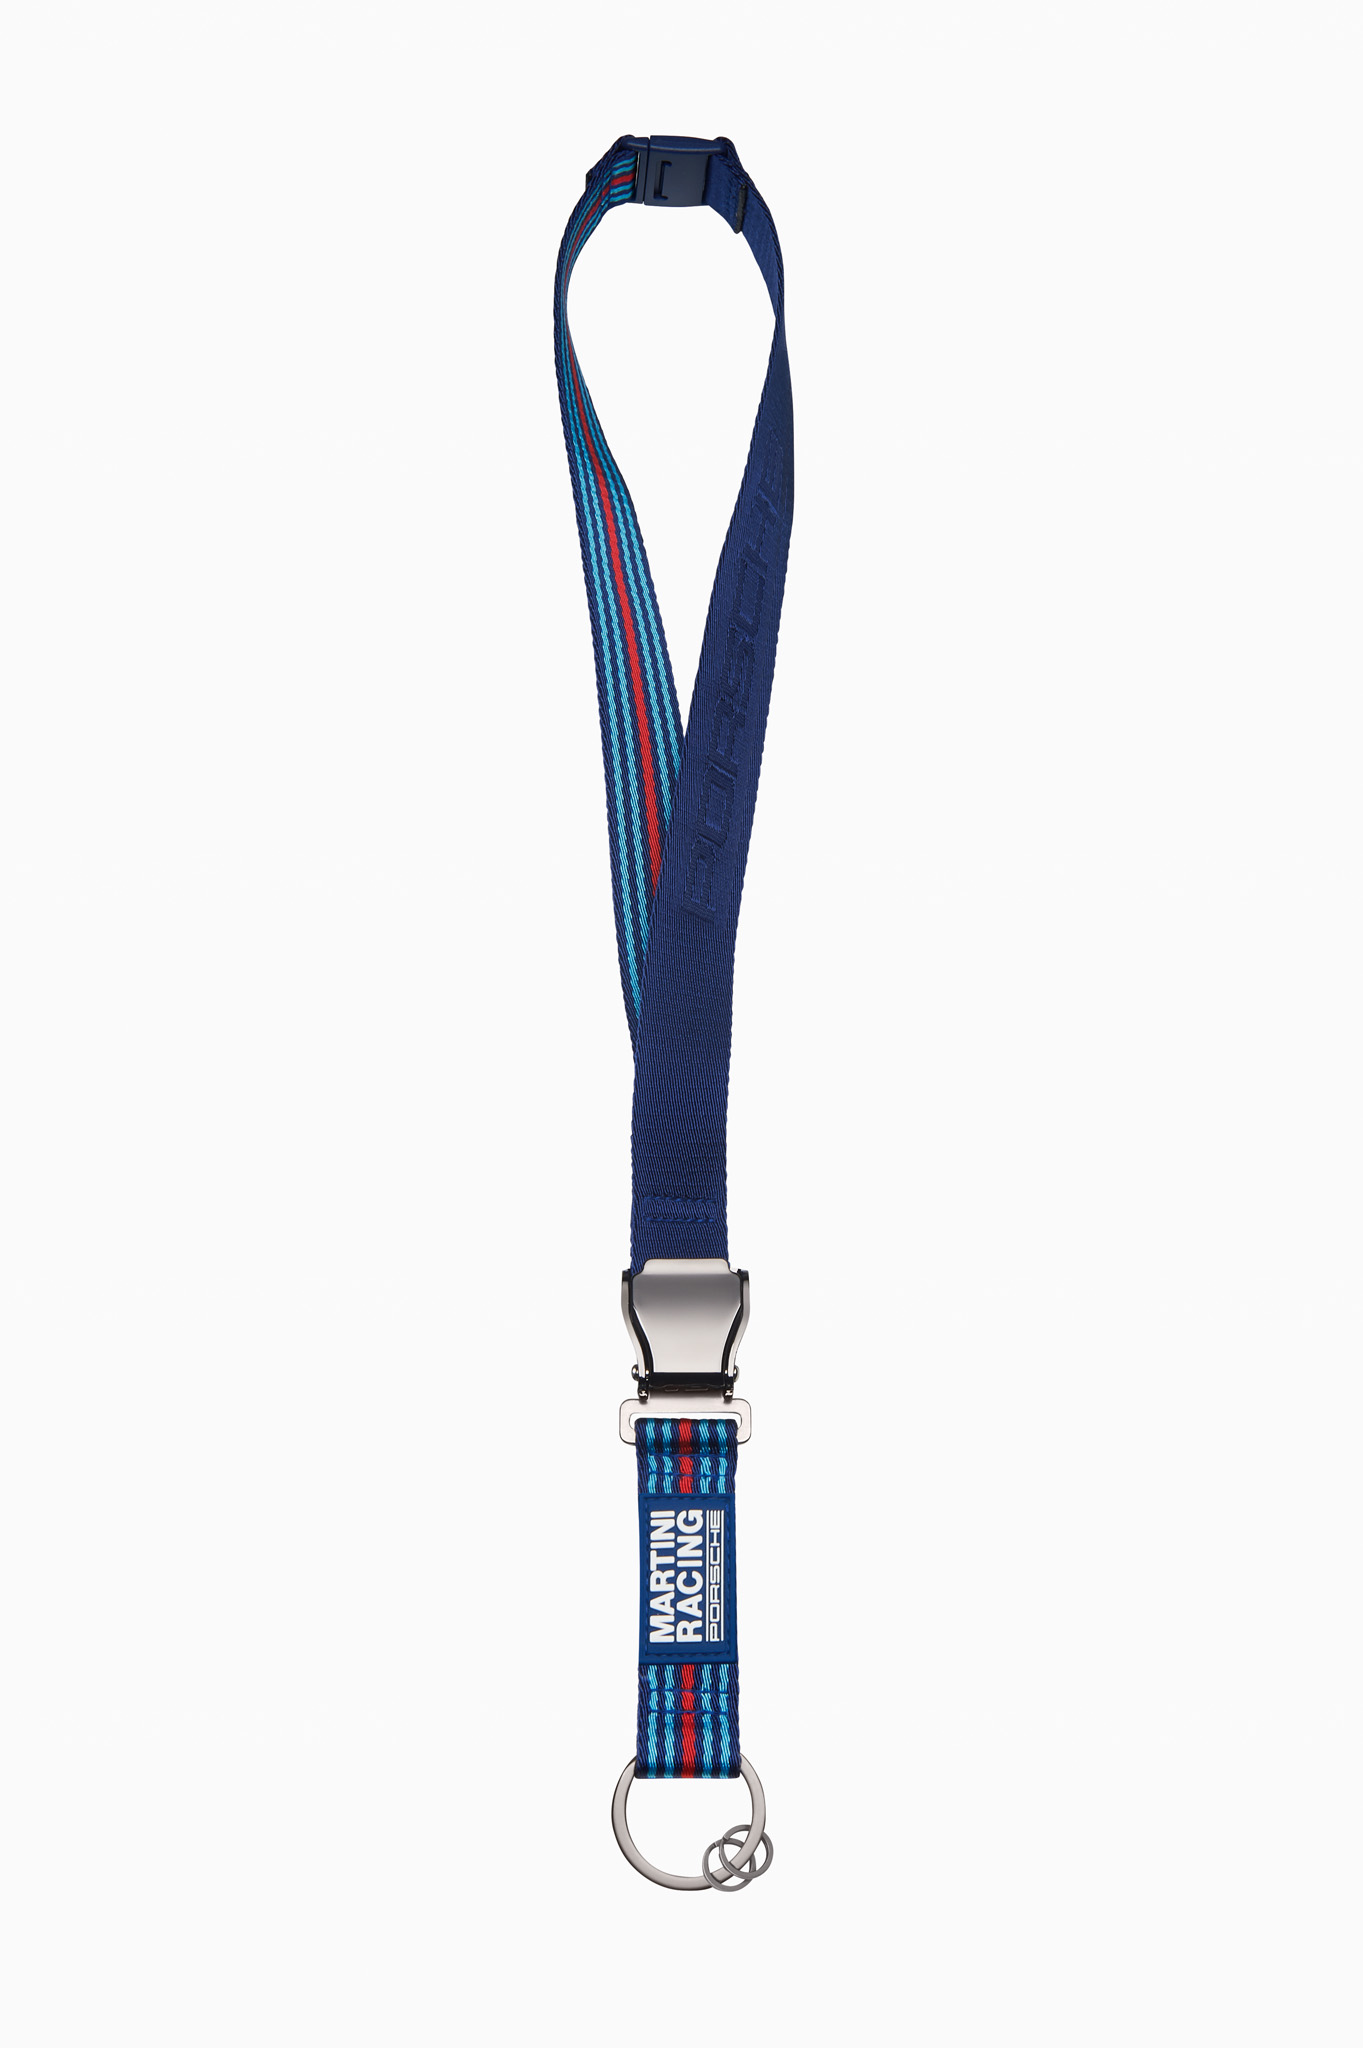 MARTINI RACING Collection, 2 in 1 Lanyard zoom